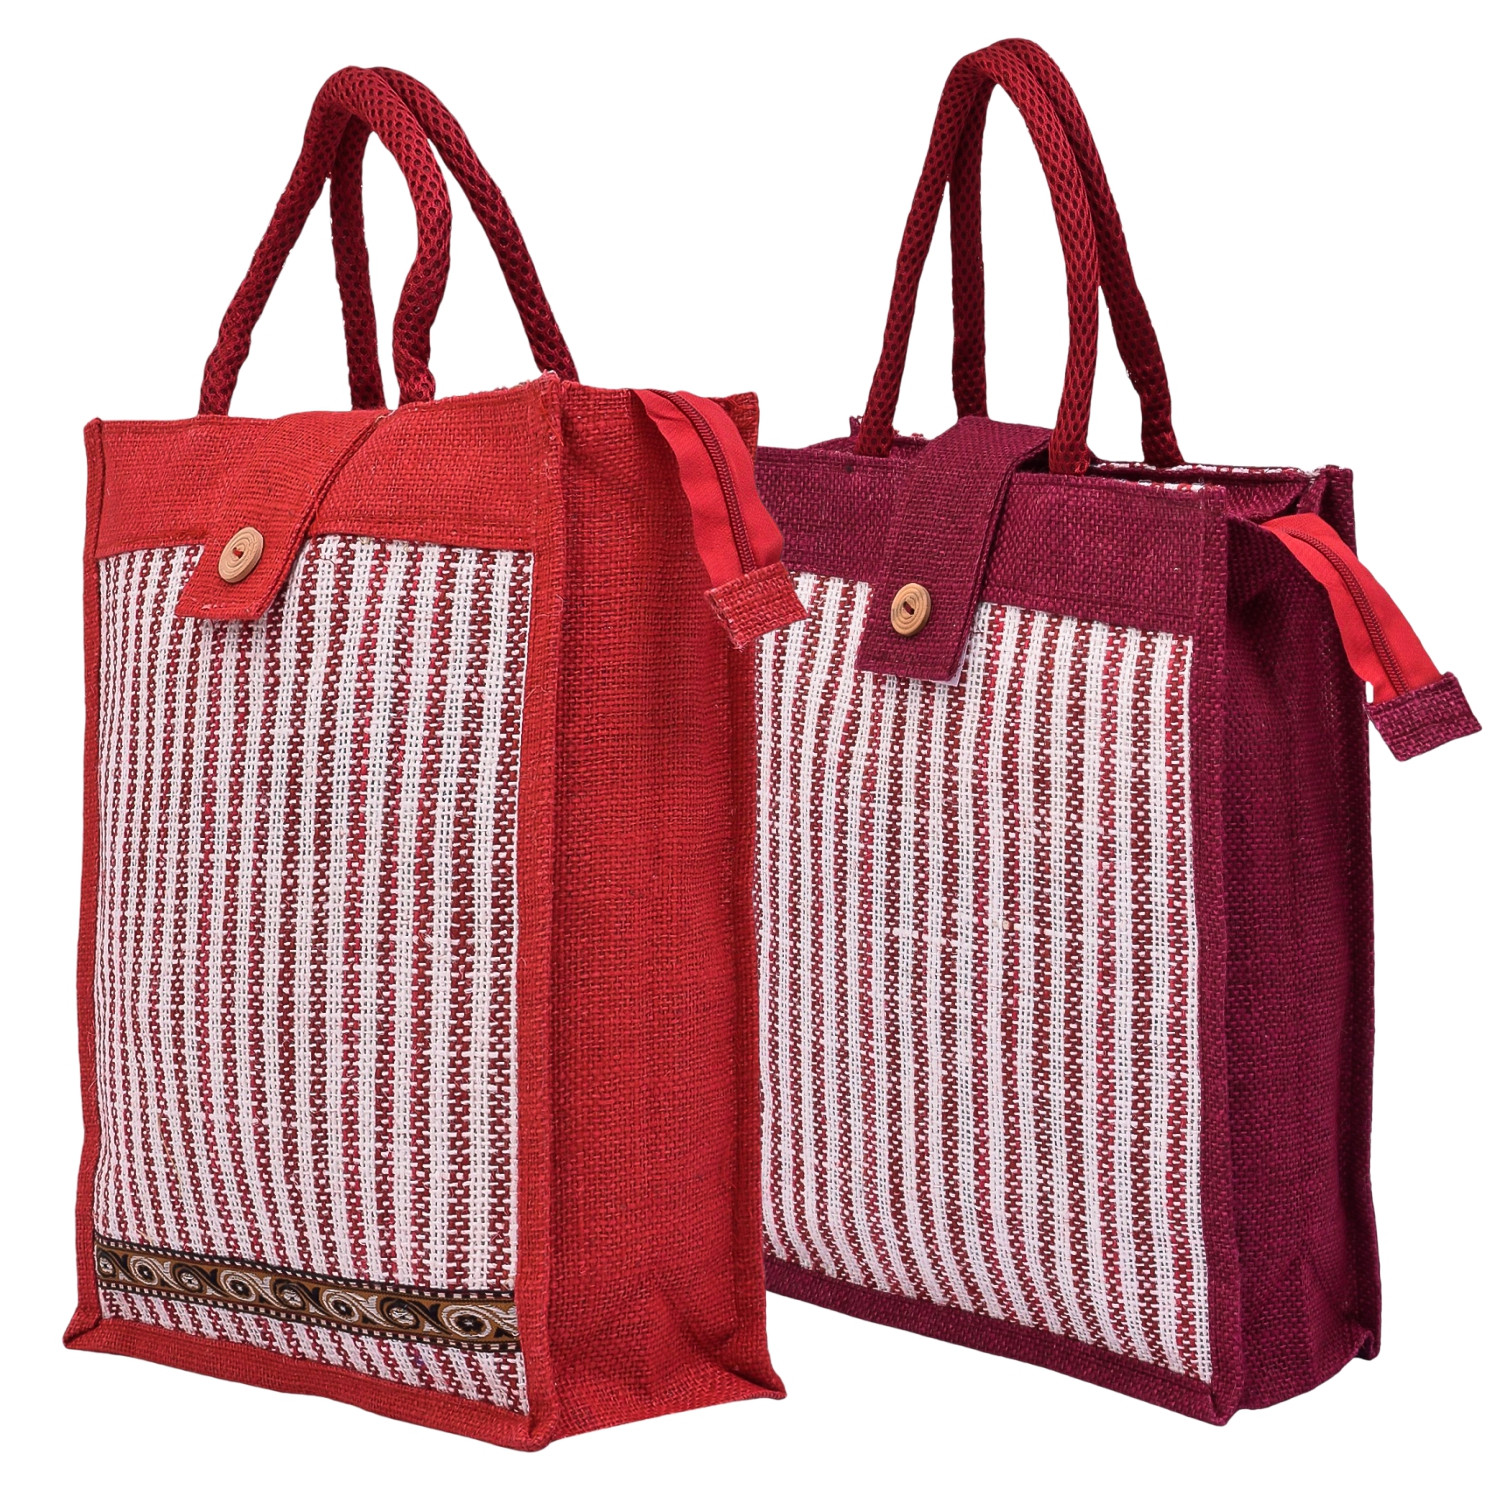 Kuber Industries Shopping Bag | Jute Carry Bag | Zipper Grocery Bag with Handle | Vegetable Bag with Top Flap | Reusable Shopping Bag | Lining-Grocery Bag | Medium | Pack of 2 | Multi